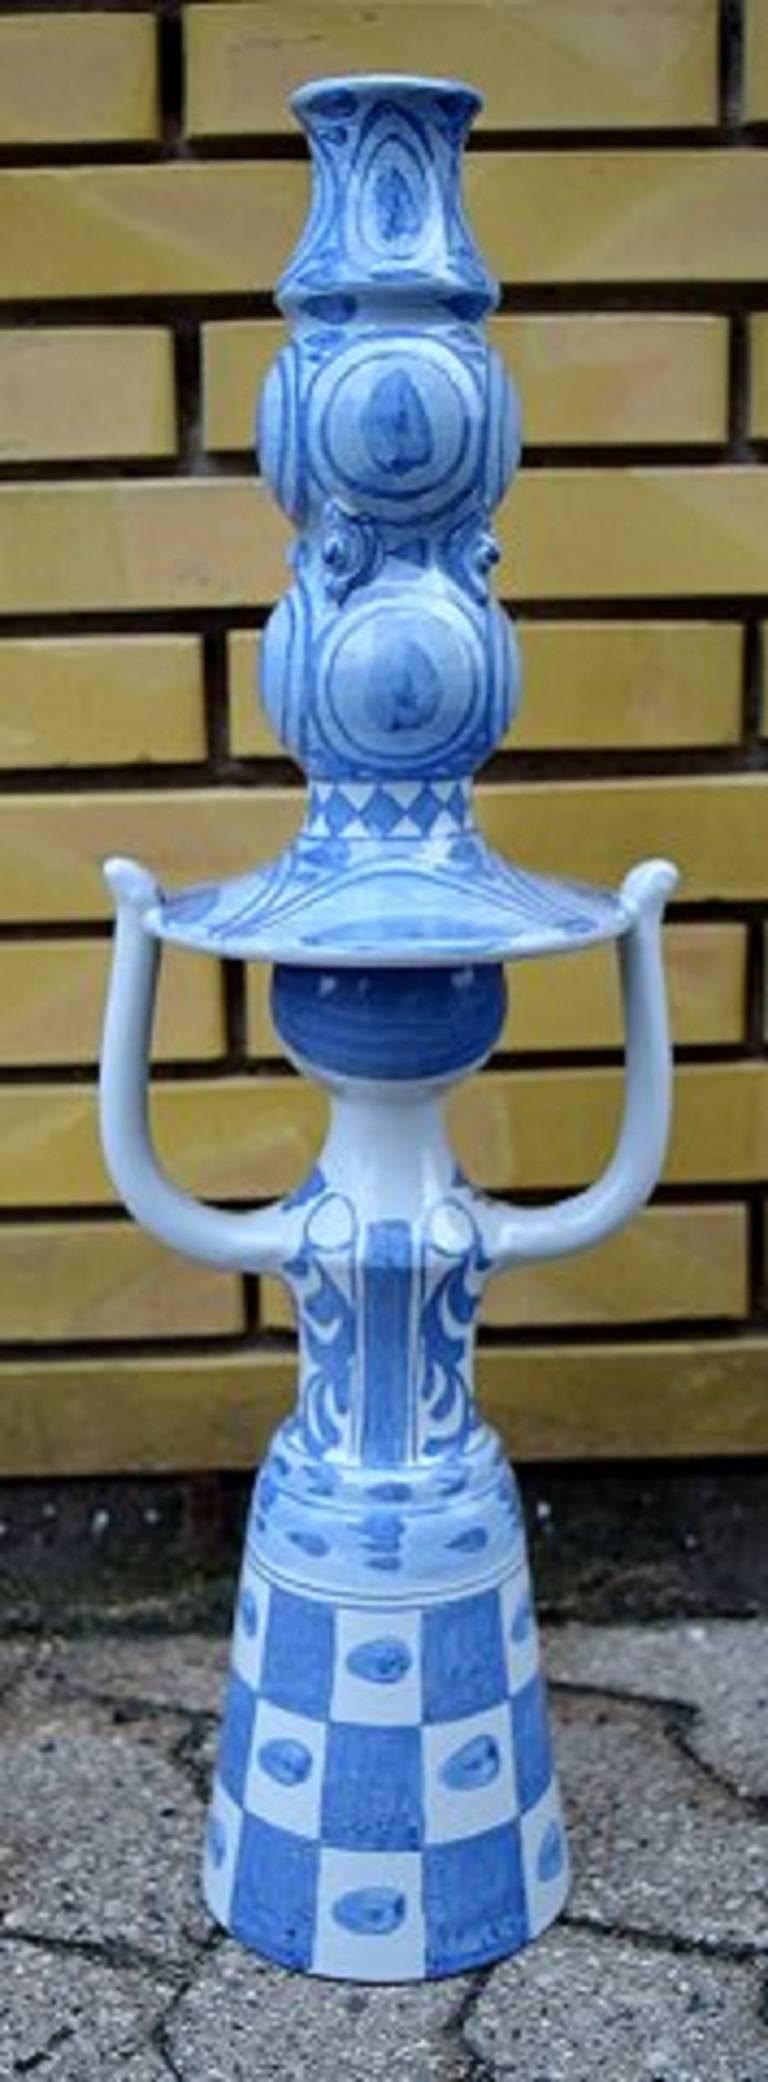 Colossal Bjorn Wiinblad figure. Candlestick L15.

The Blue House, Denmark.

Measures: 67 cm. x 21 cm.

Monogram, 1974.

In perfect condition.